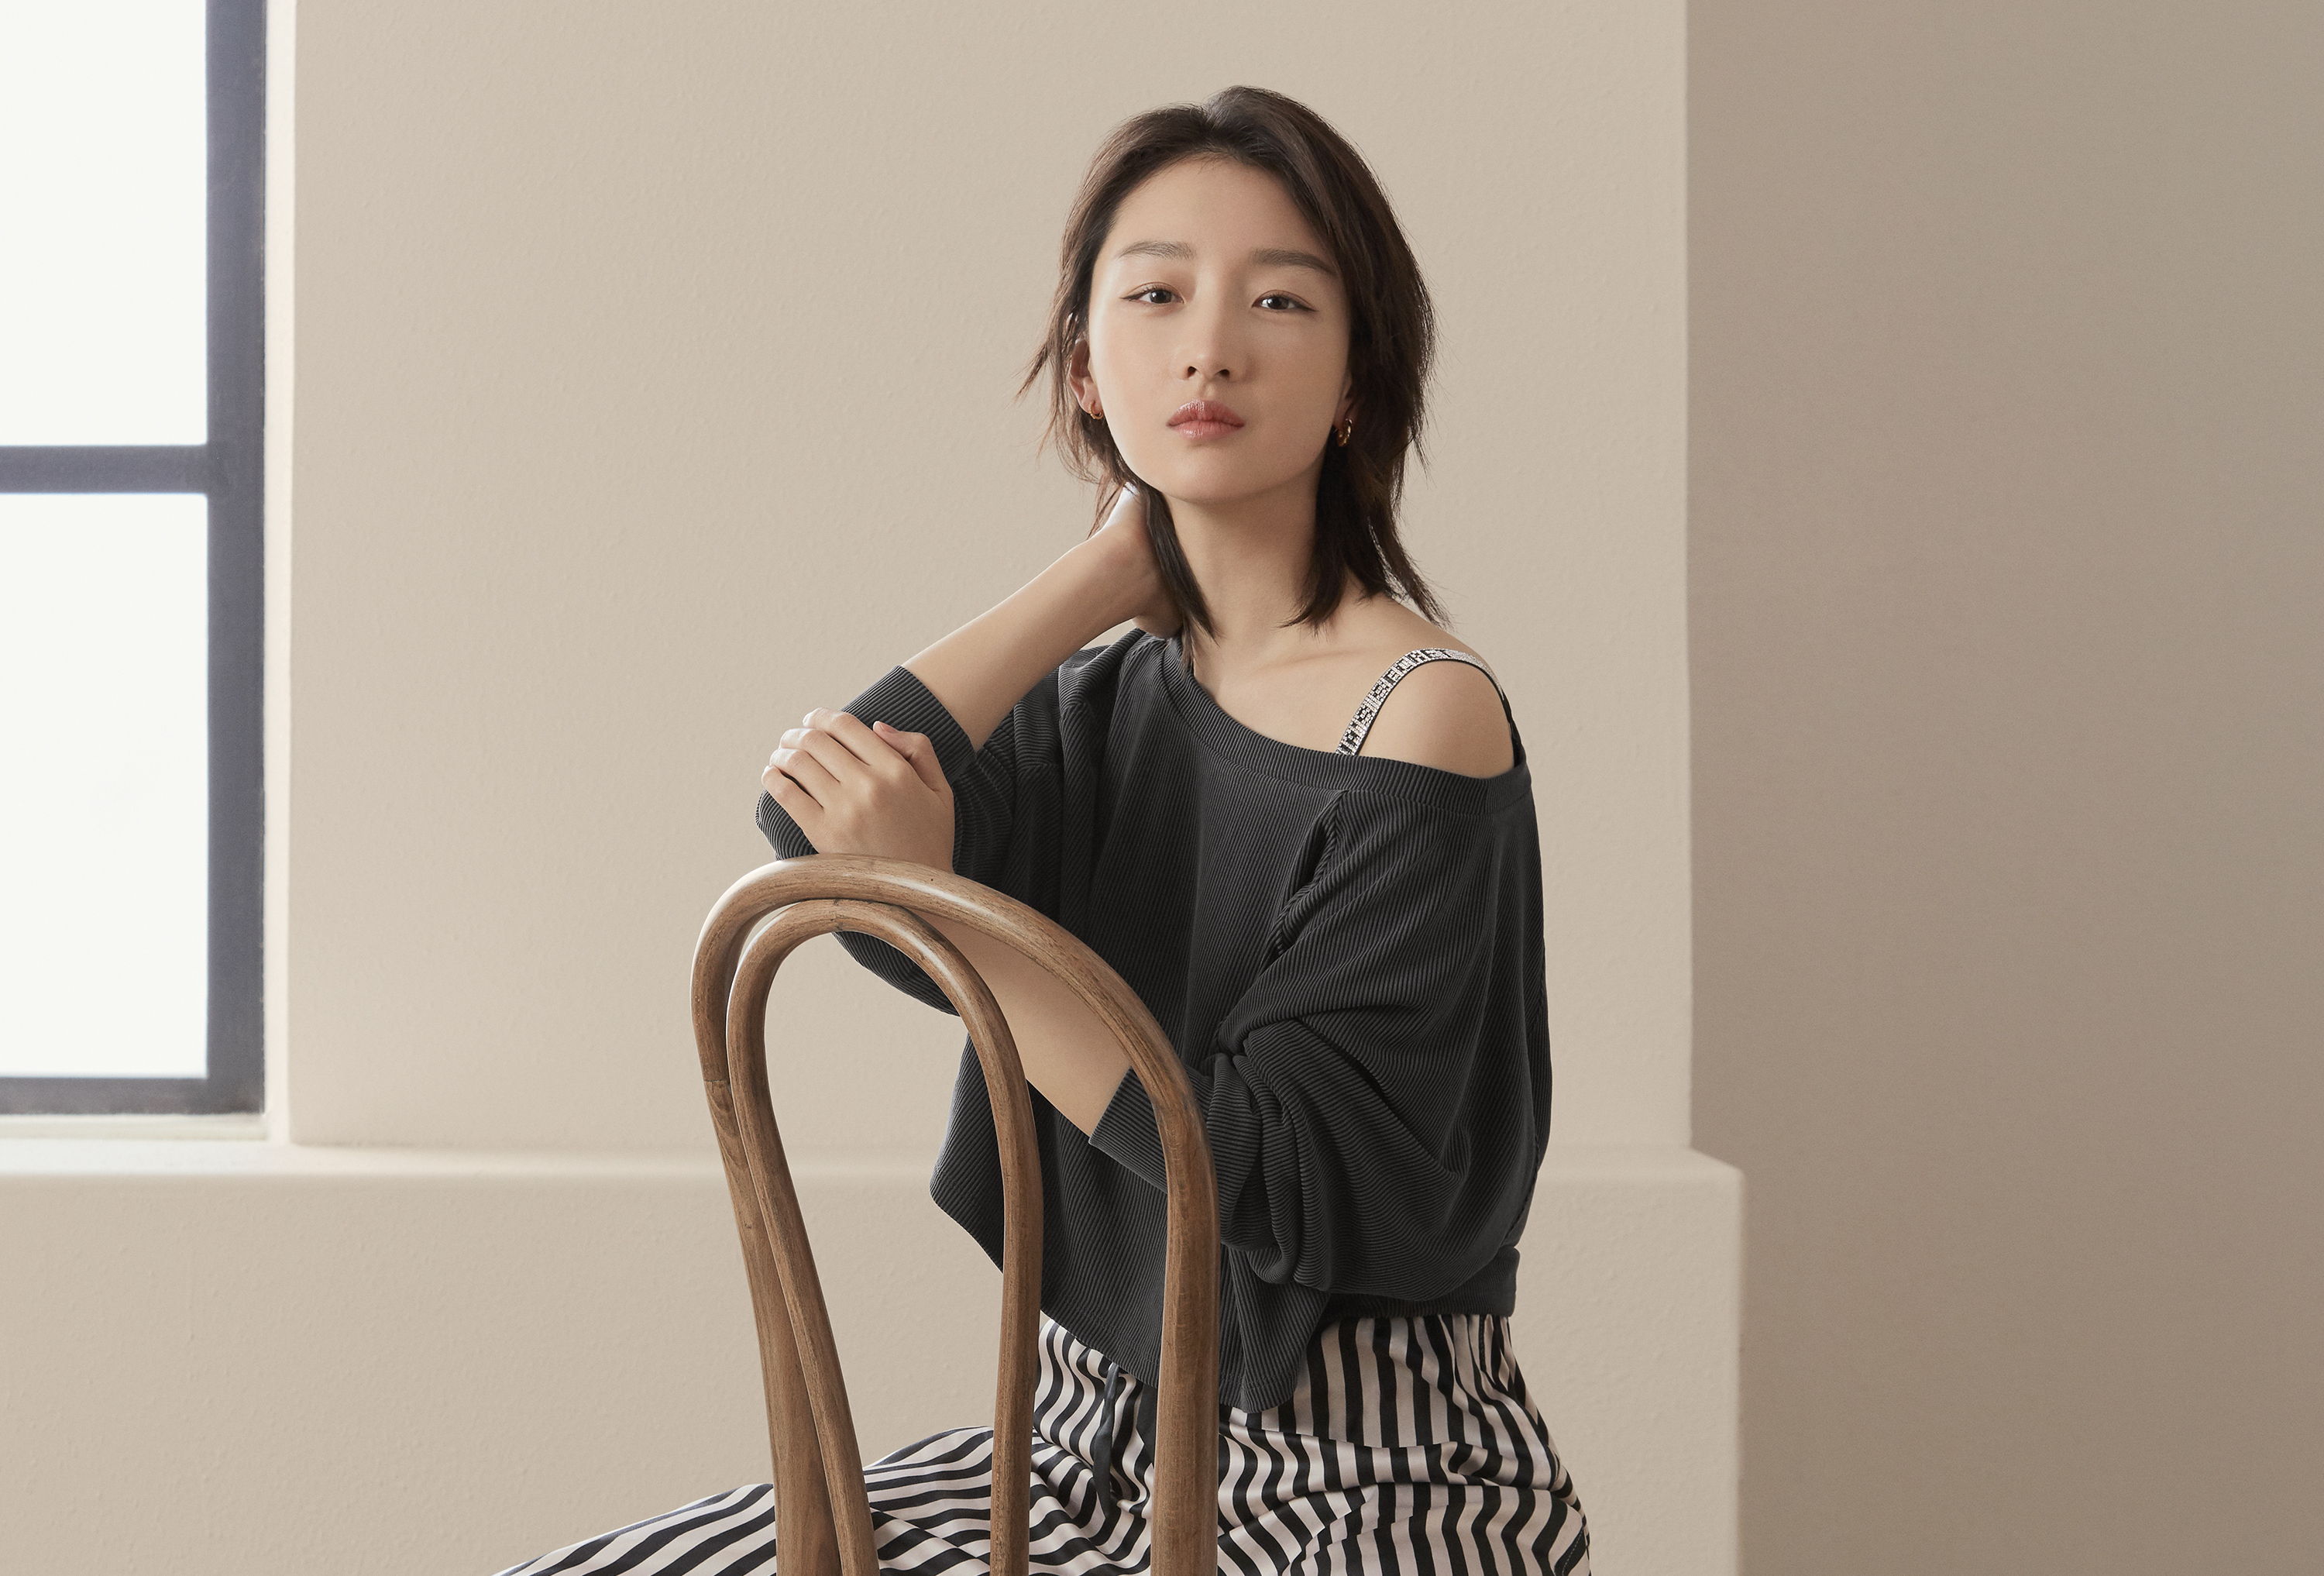 Zhou Dongyu Criticised For Looking Like A Child In Adult's Clothes